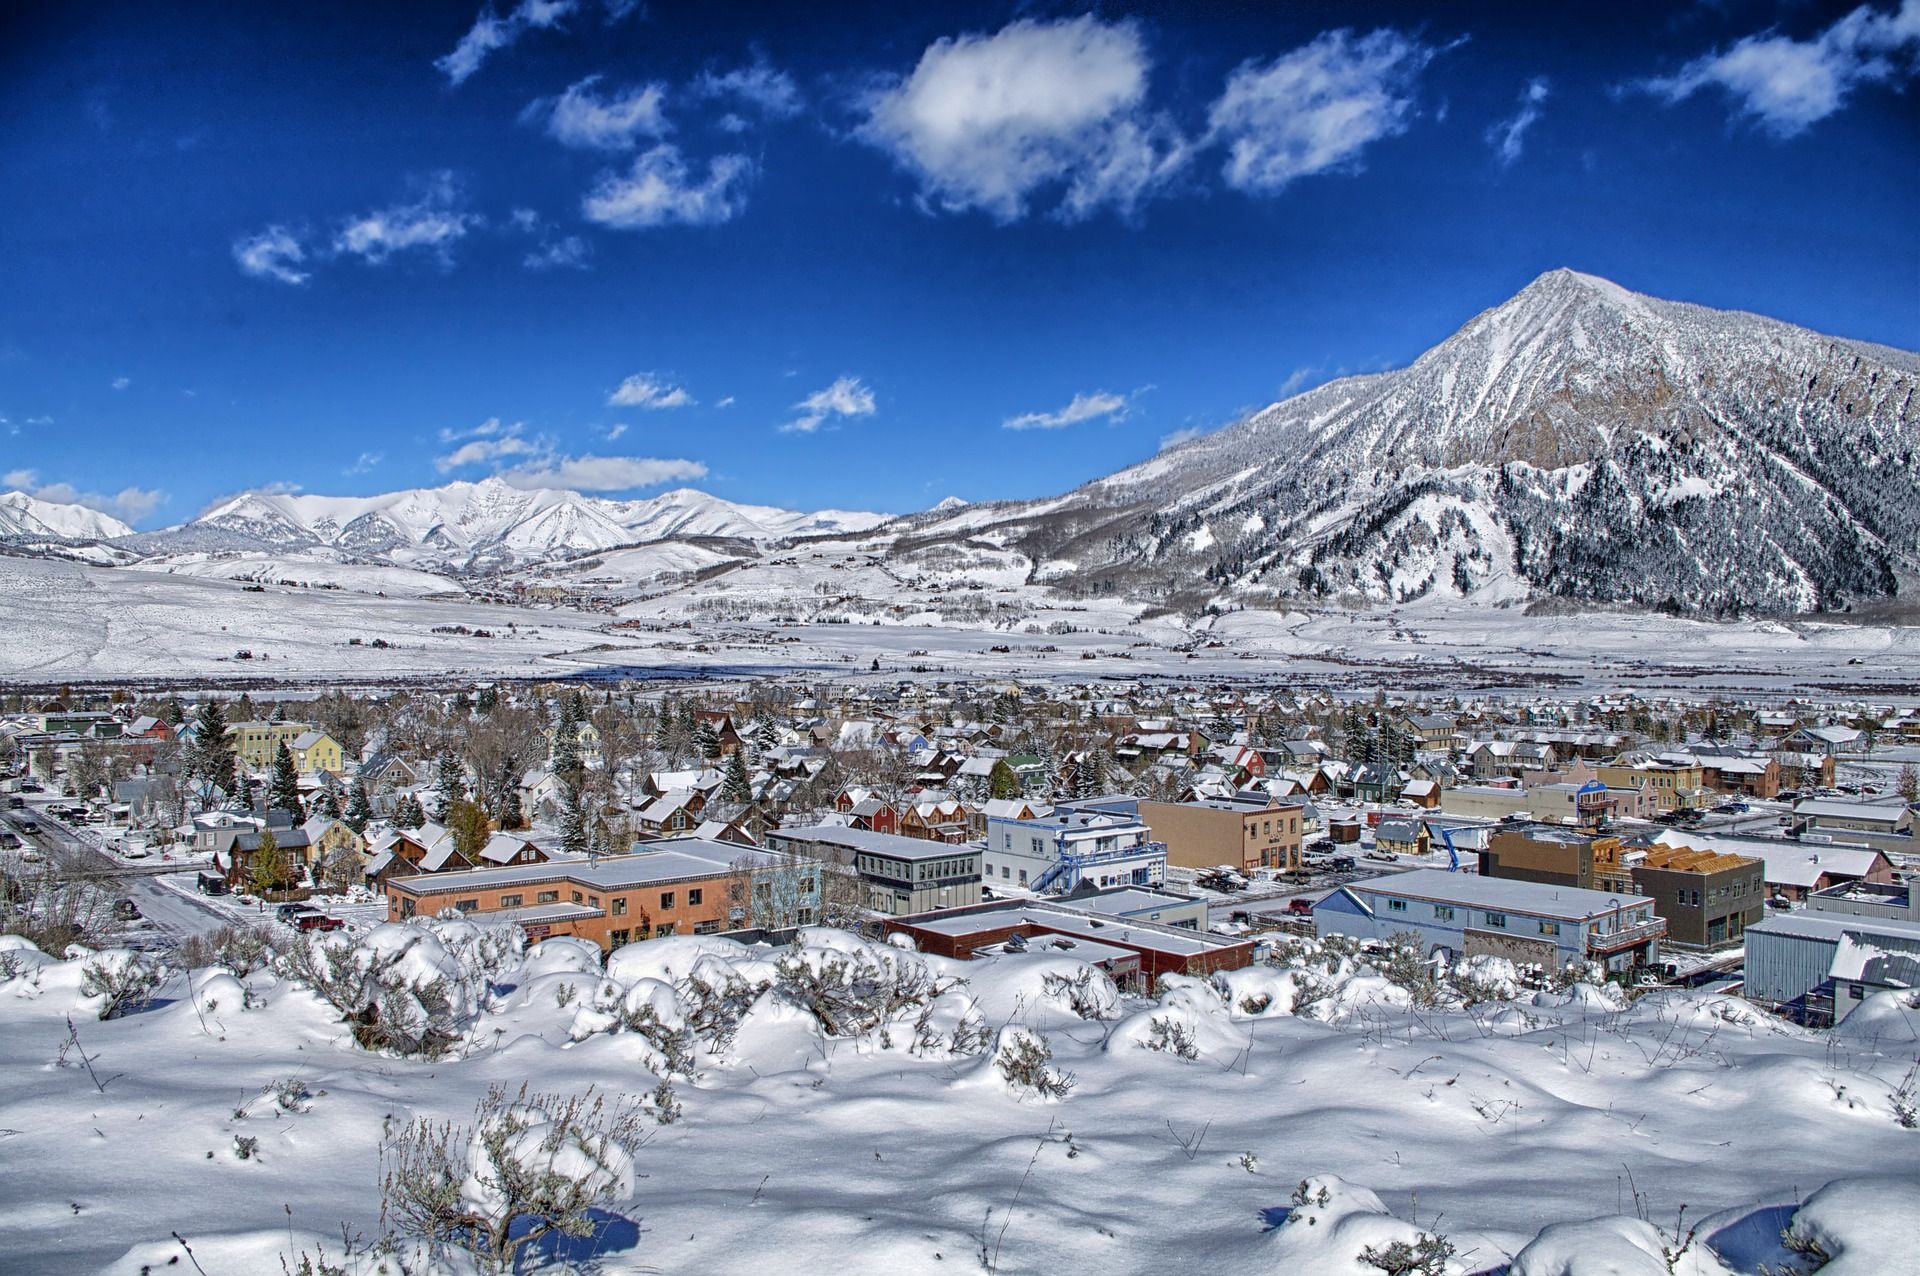 10 Things To Do In Crested Butte Complete Guide To The Last Great Ski Resort Town 9300